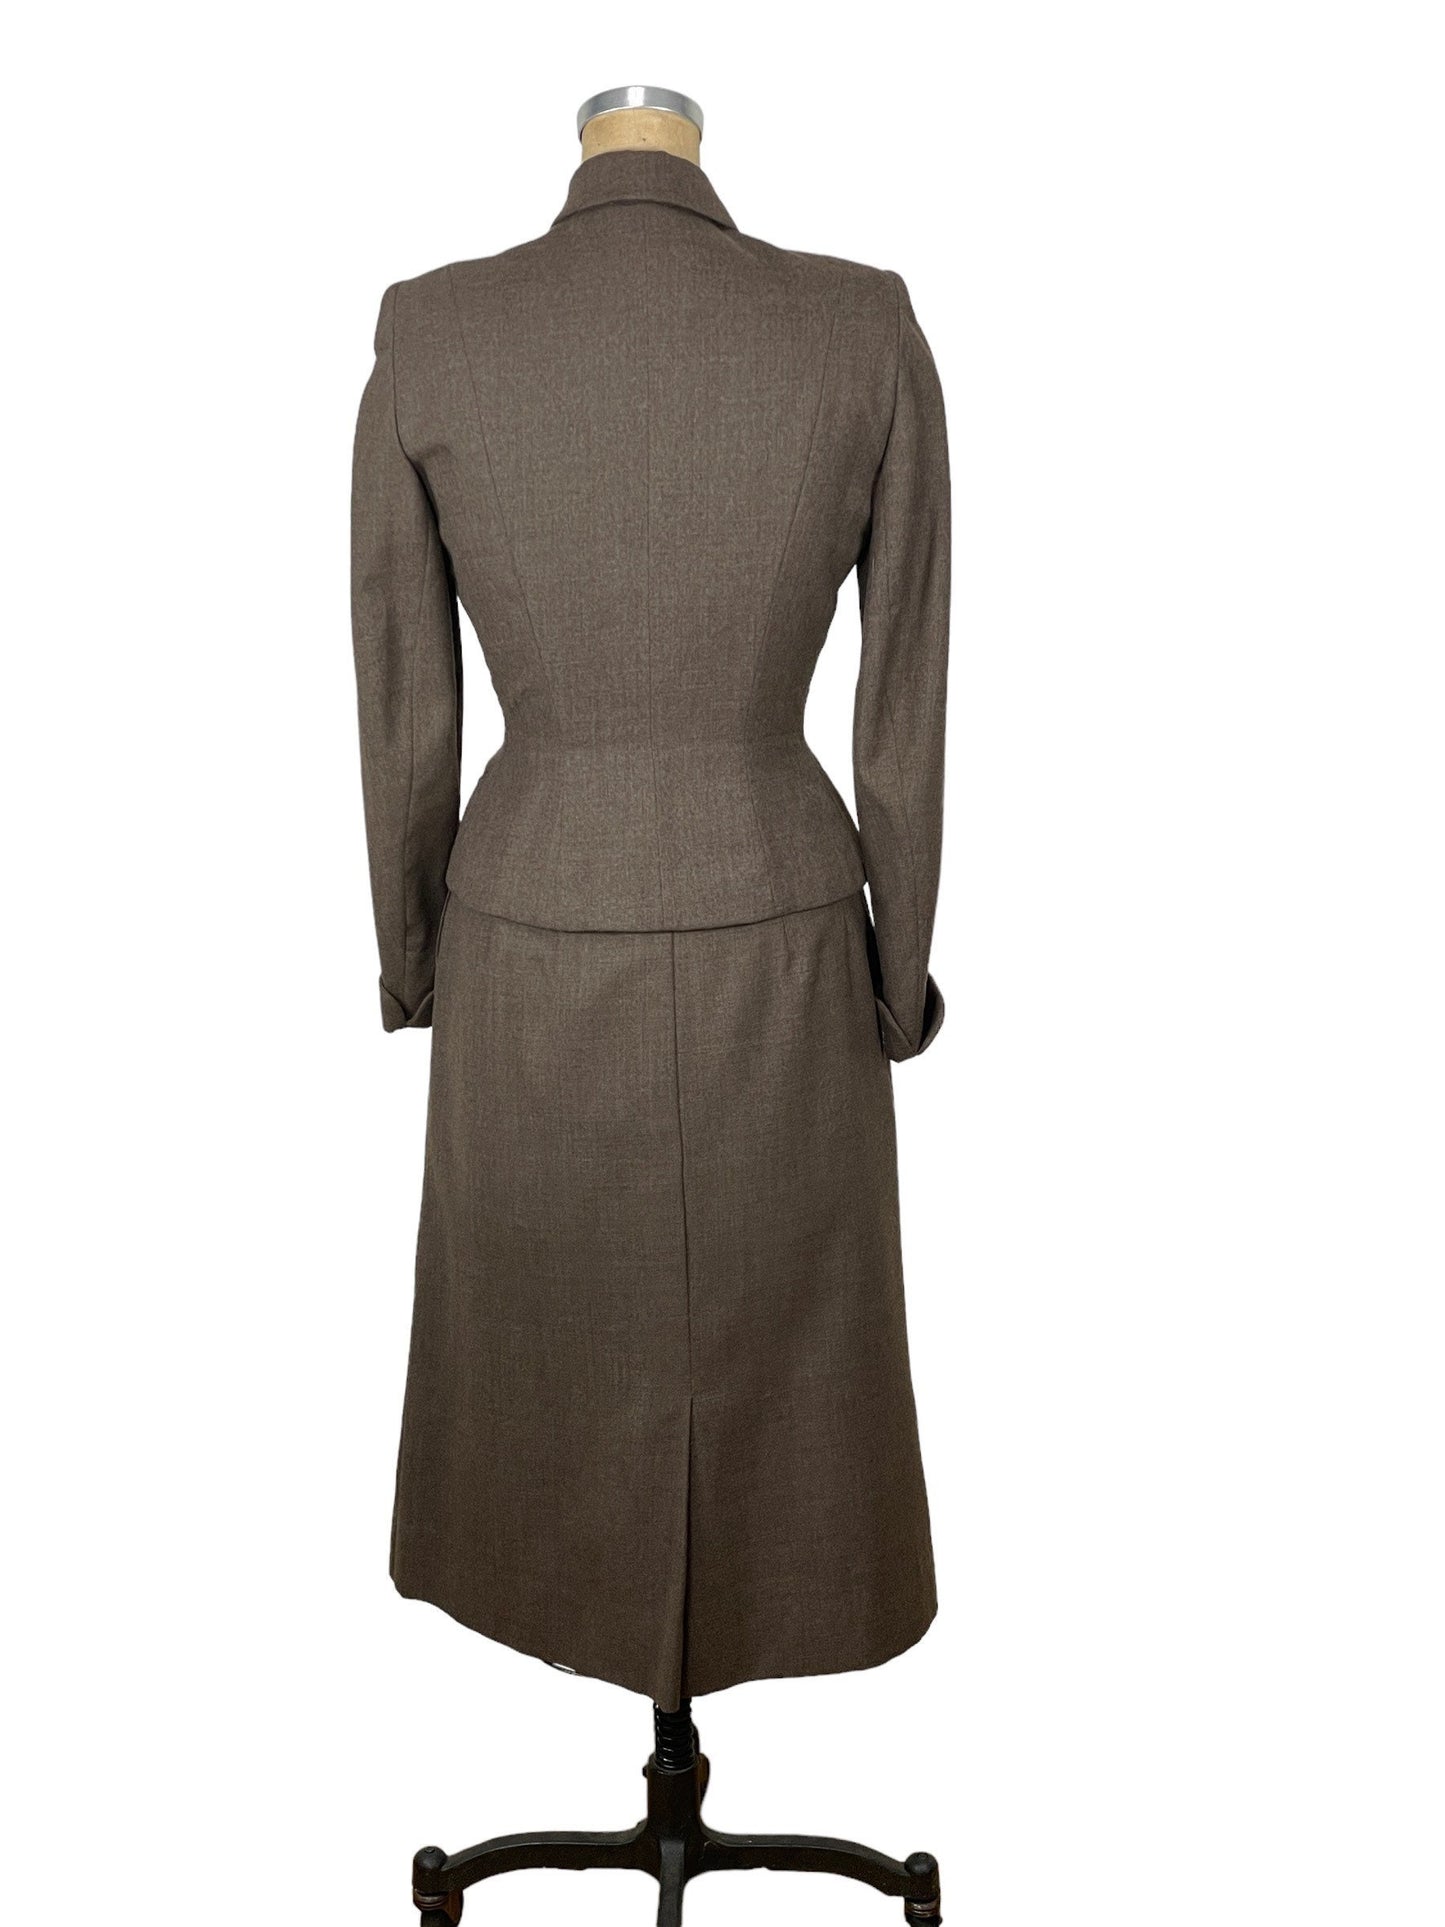 1940s brown wool skirt suit with fitted jacket Size S/M